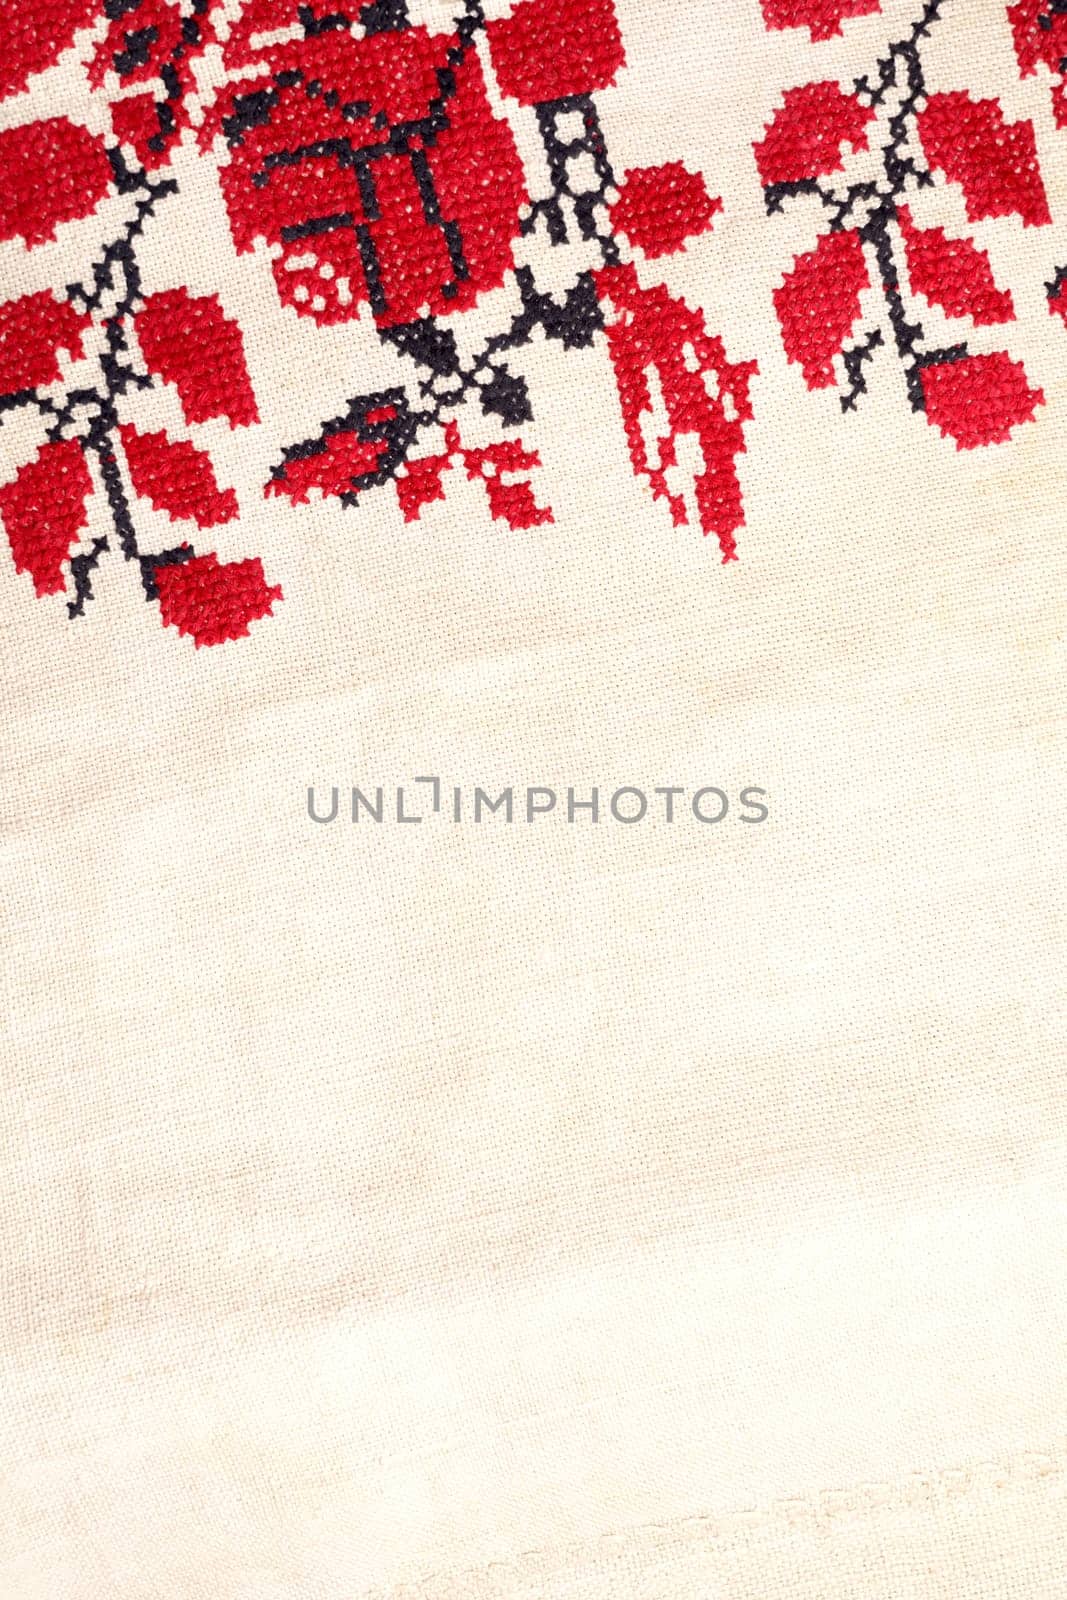 Beige white farmhouse style stripes texture. Woven linen cloth pattern background. Line striped closeup weave fabric for kitchen towel material. Pinstripe fiber picnic table cloth . Black and red embroidery. Embroidered good like old handmade cross-stitch ethnic Ukraine pattern. Ukrainian rushnyk . Red version over white background.